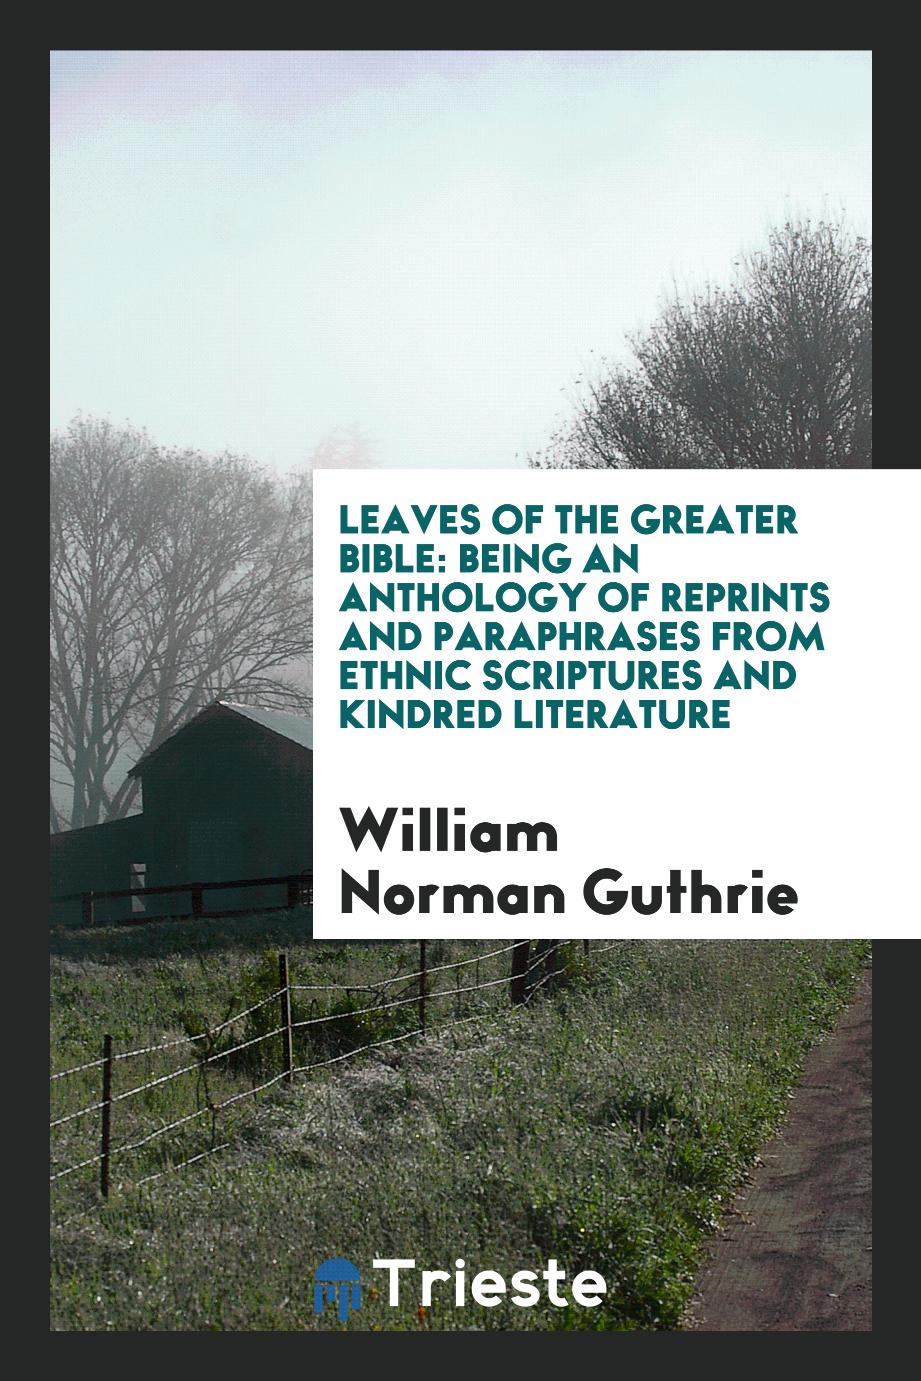 Leaves of the Greater Bible: Being an Anthology of Reprints and Paraphrases from Ethnic Scriptures and Kindred Literature